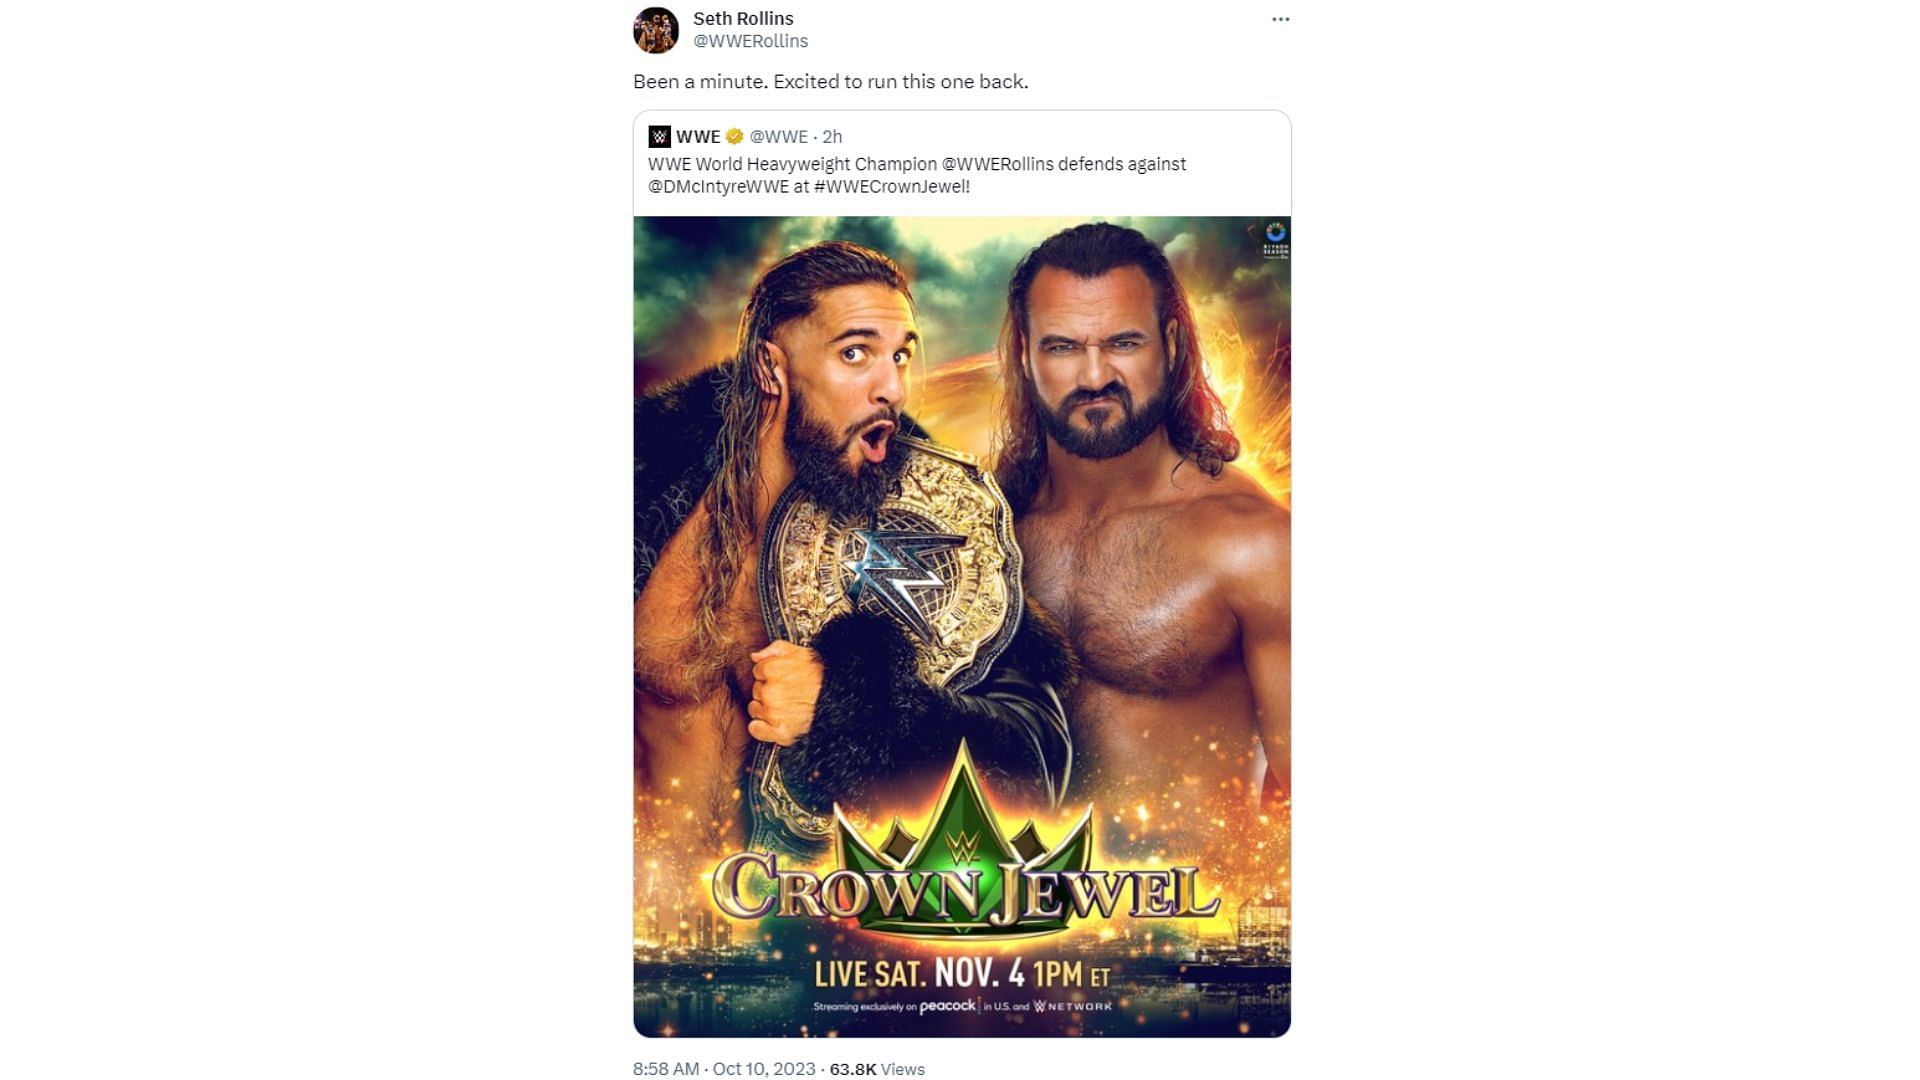 Seth Rollins reacts to his upcoming title defense against Drew McIntyre at Crown Jewel.